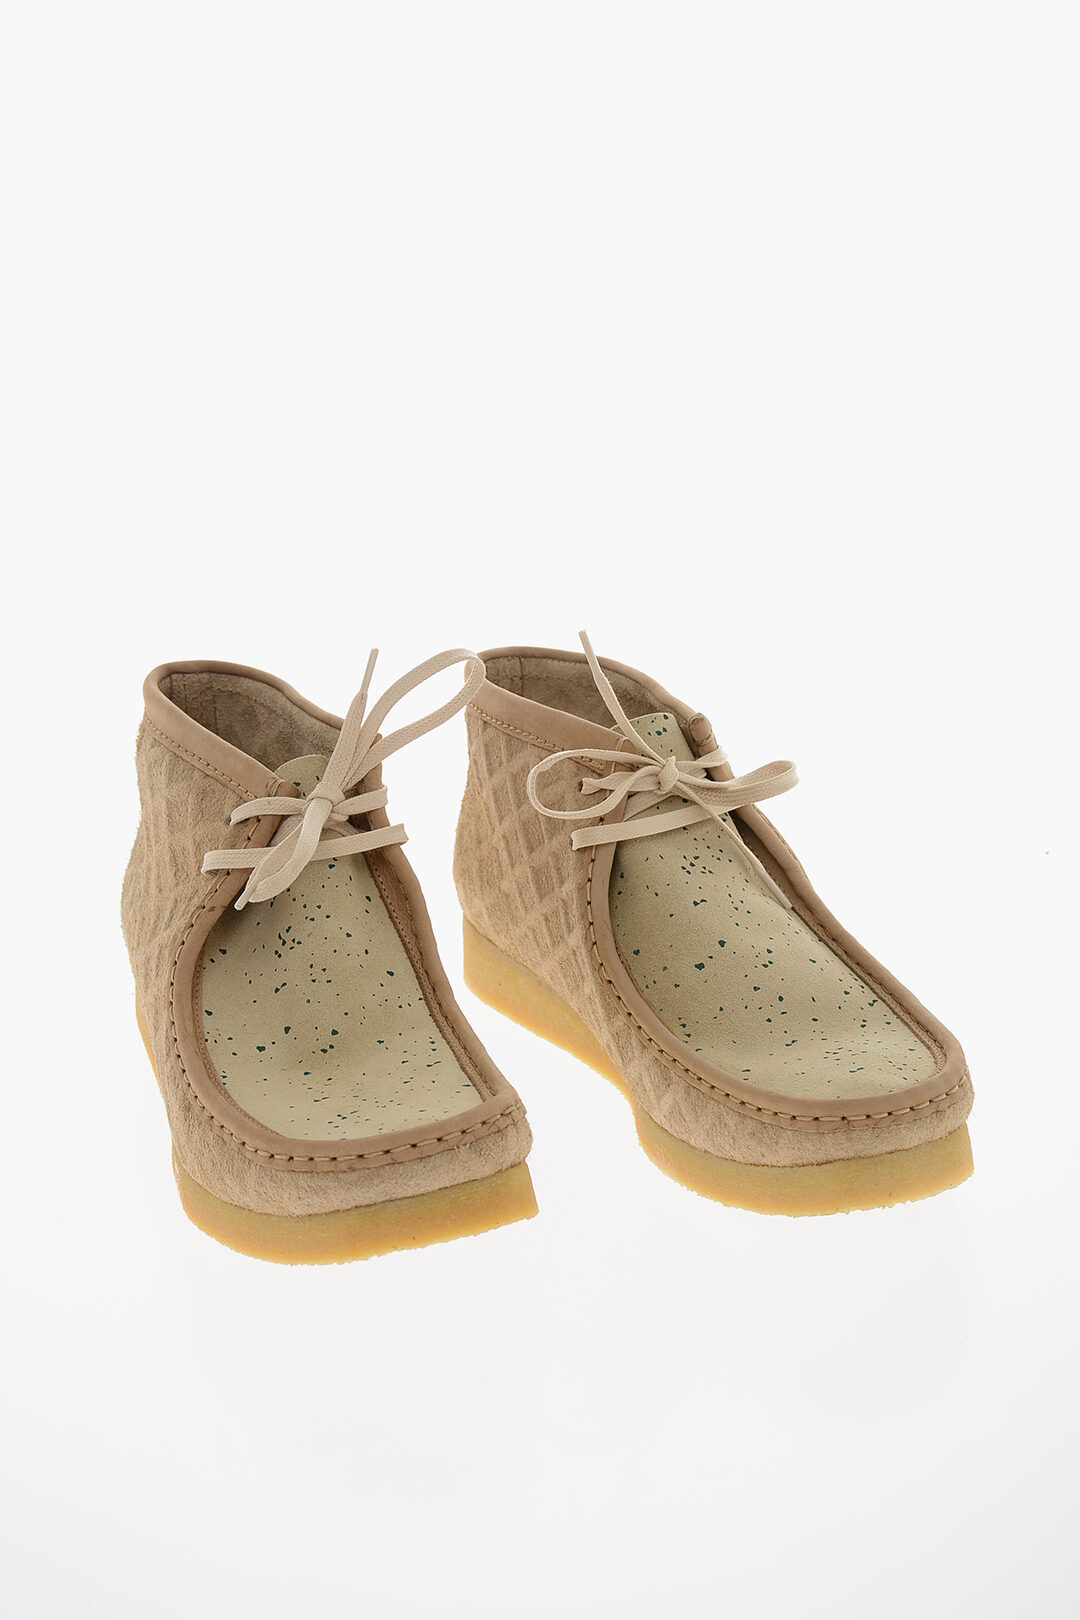 Clarks SWEET CHICK and Effect Suede WALLABEE Desert Boots men - Glamood Outlet